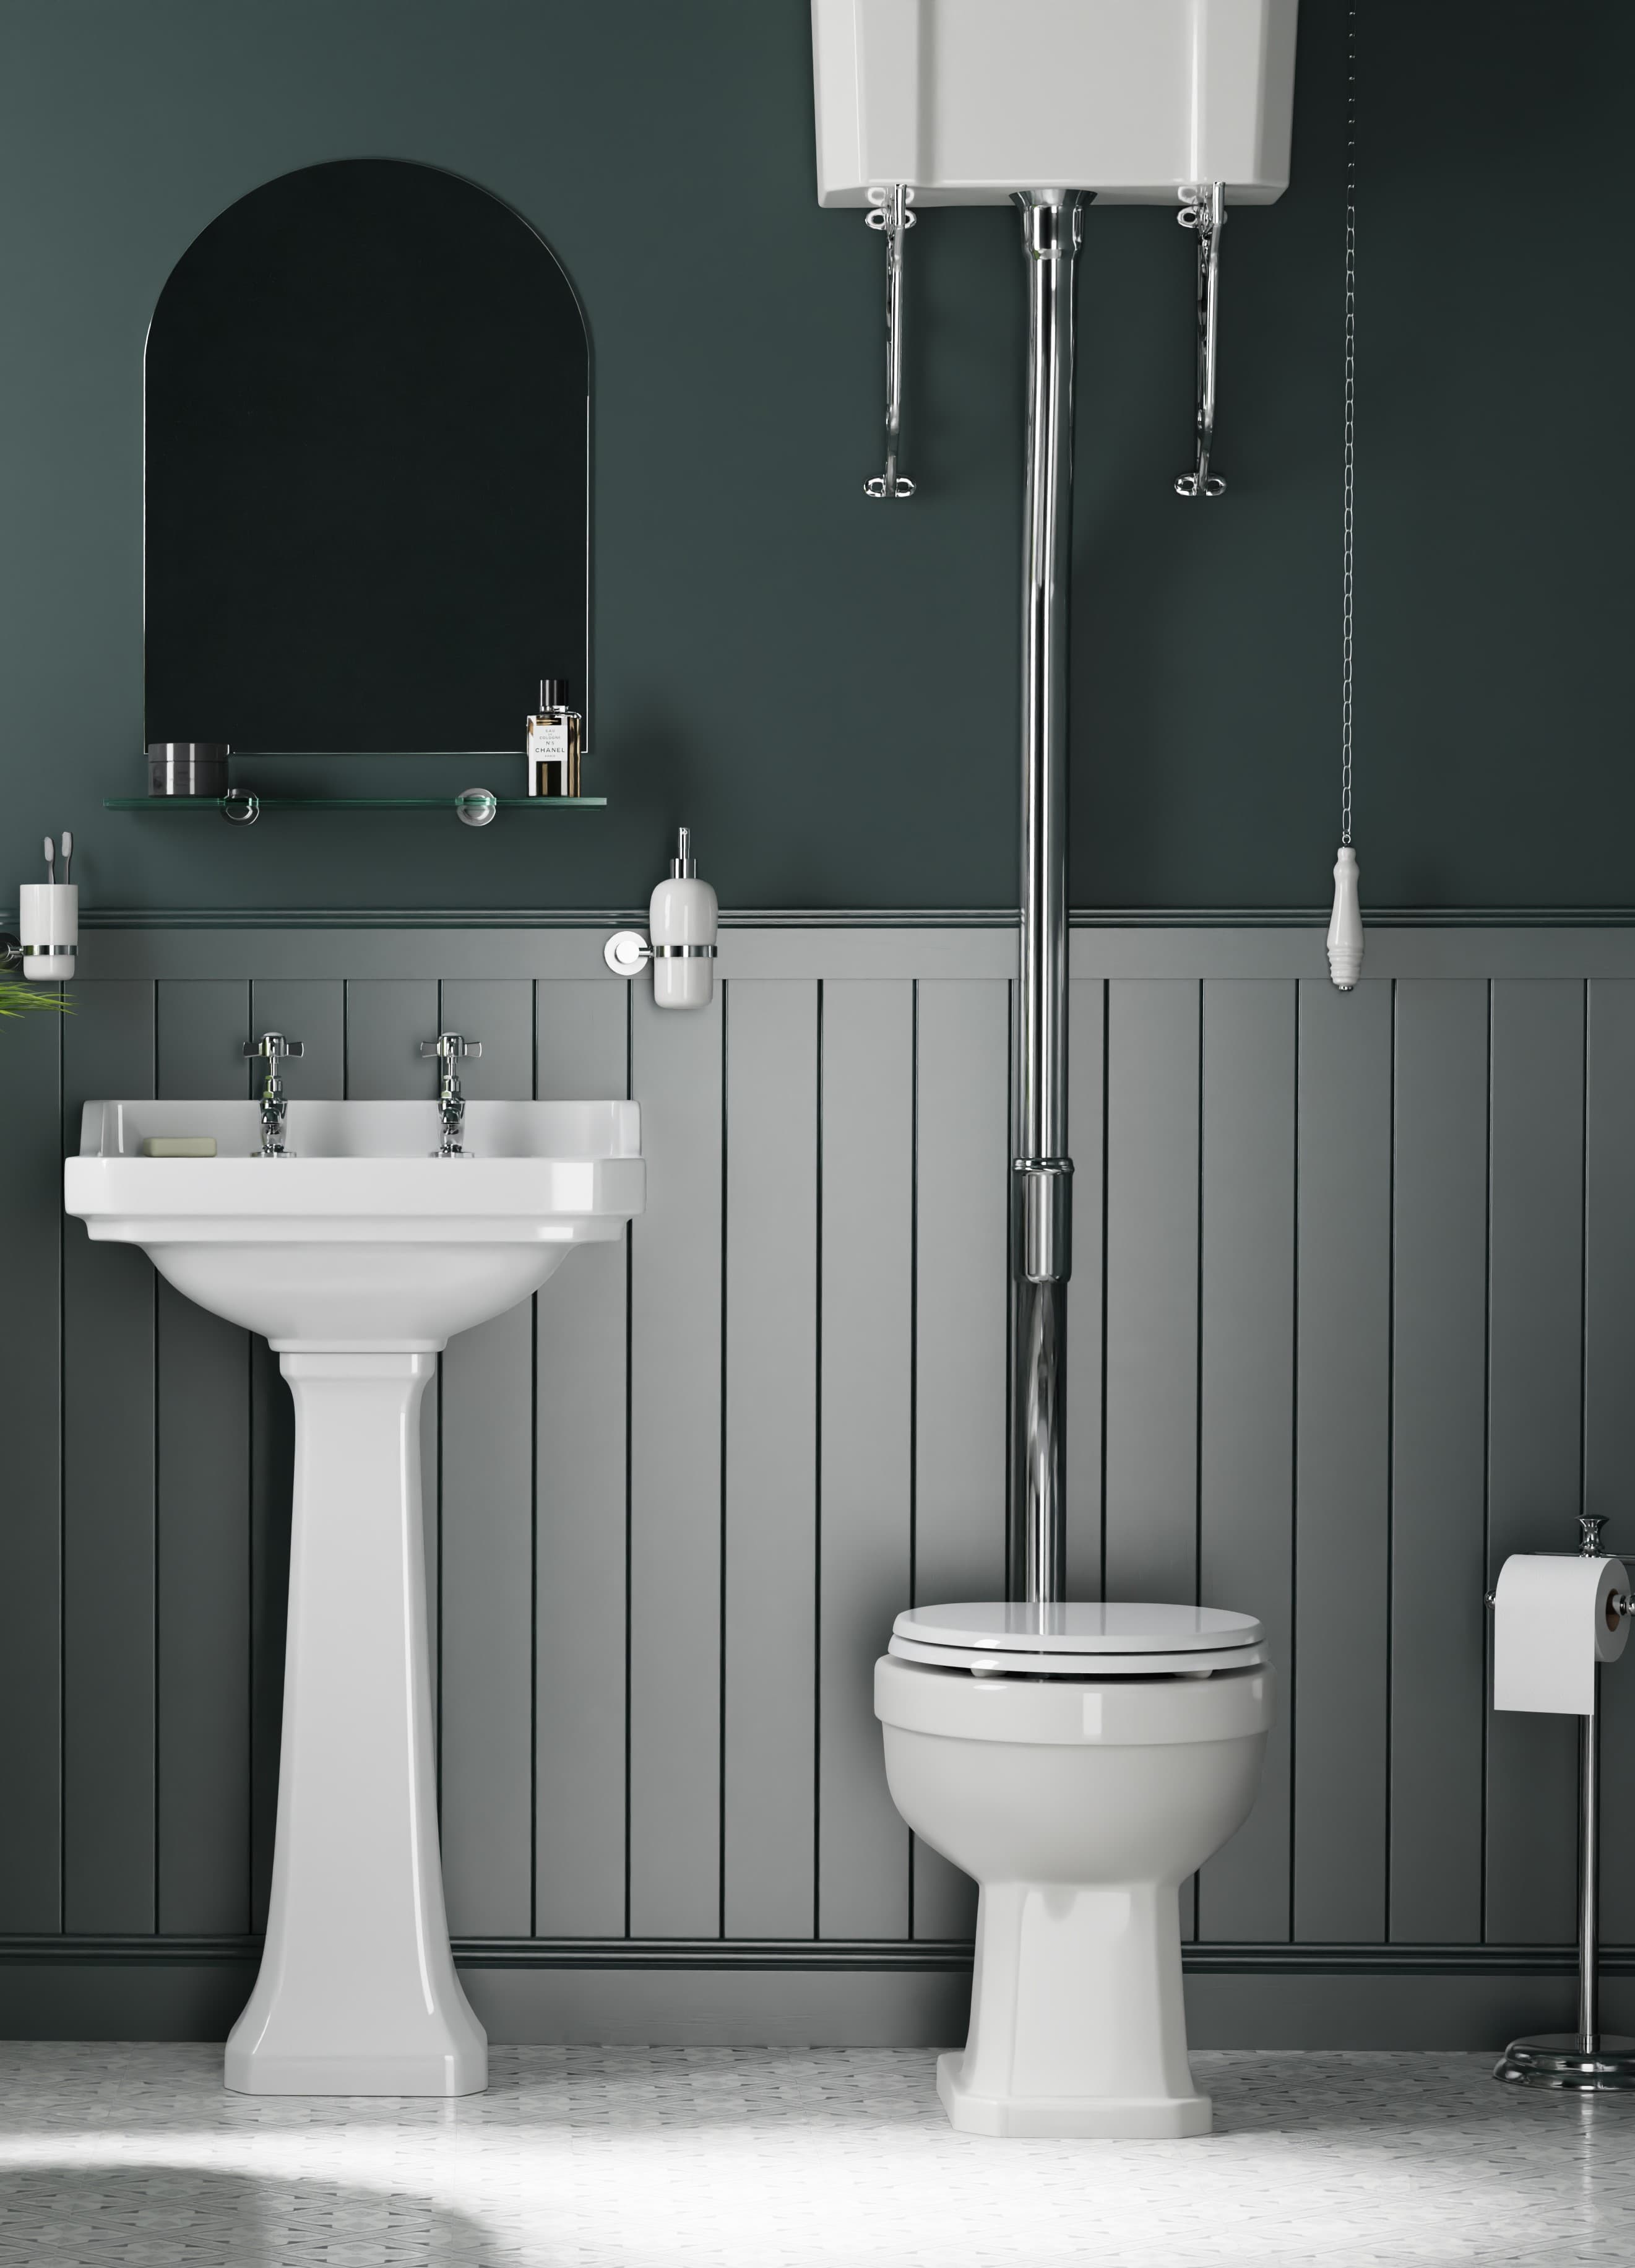 Traditional high level toilet with chrome features and traditional full pedestal basin